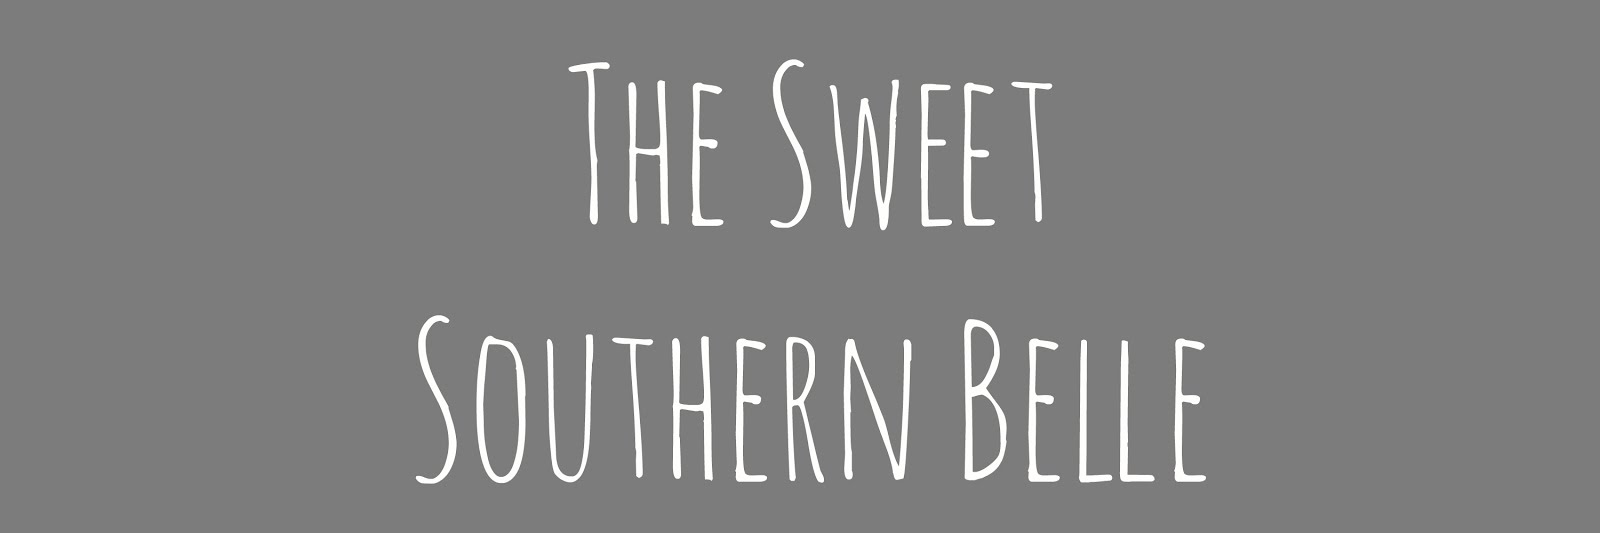 The Sweet Southern Belle